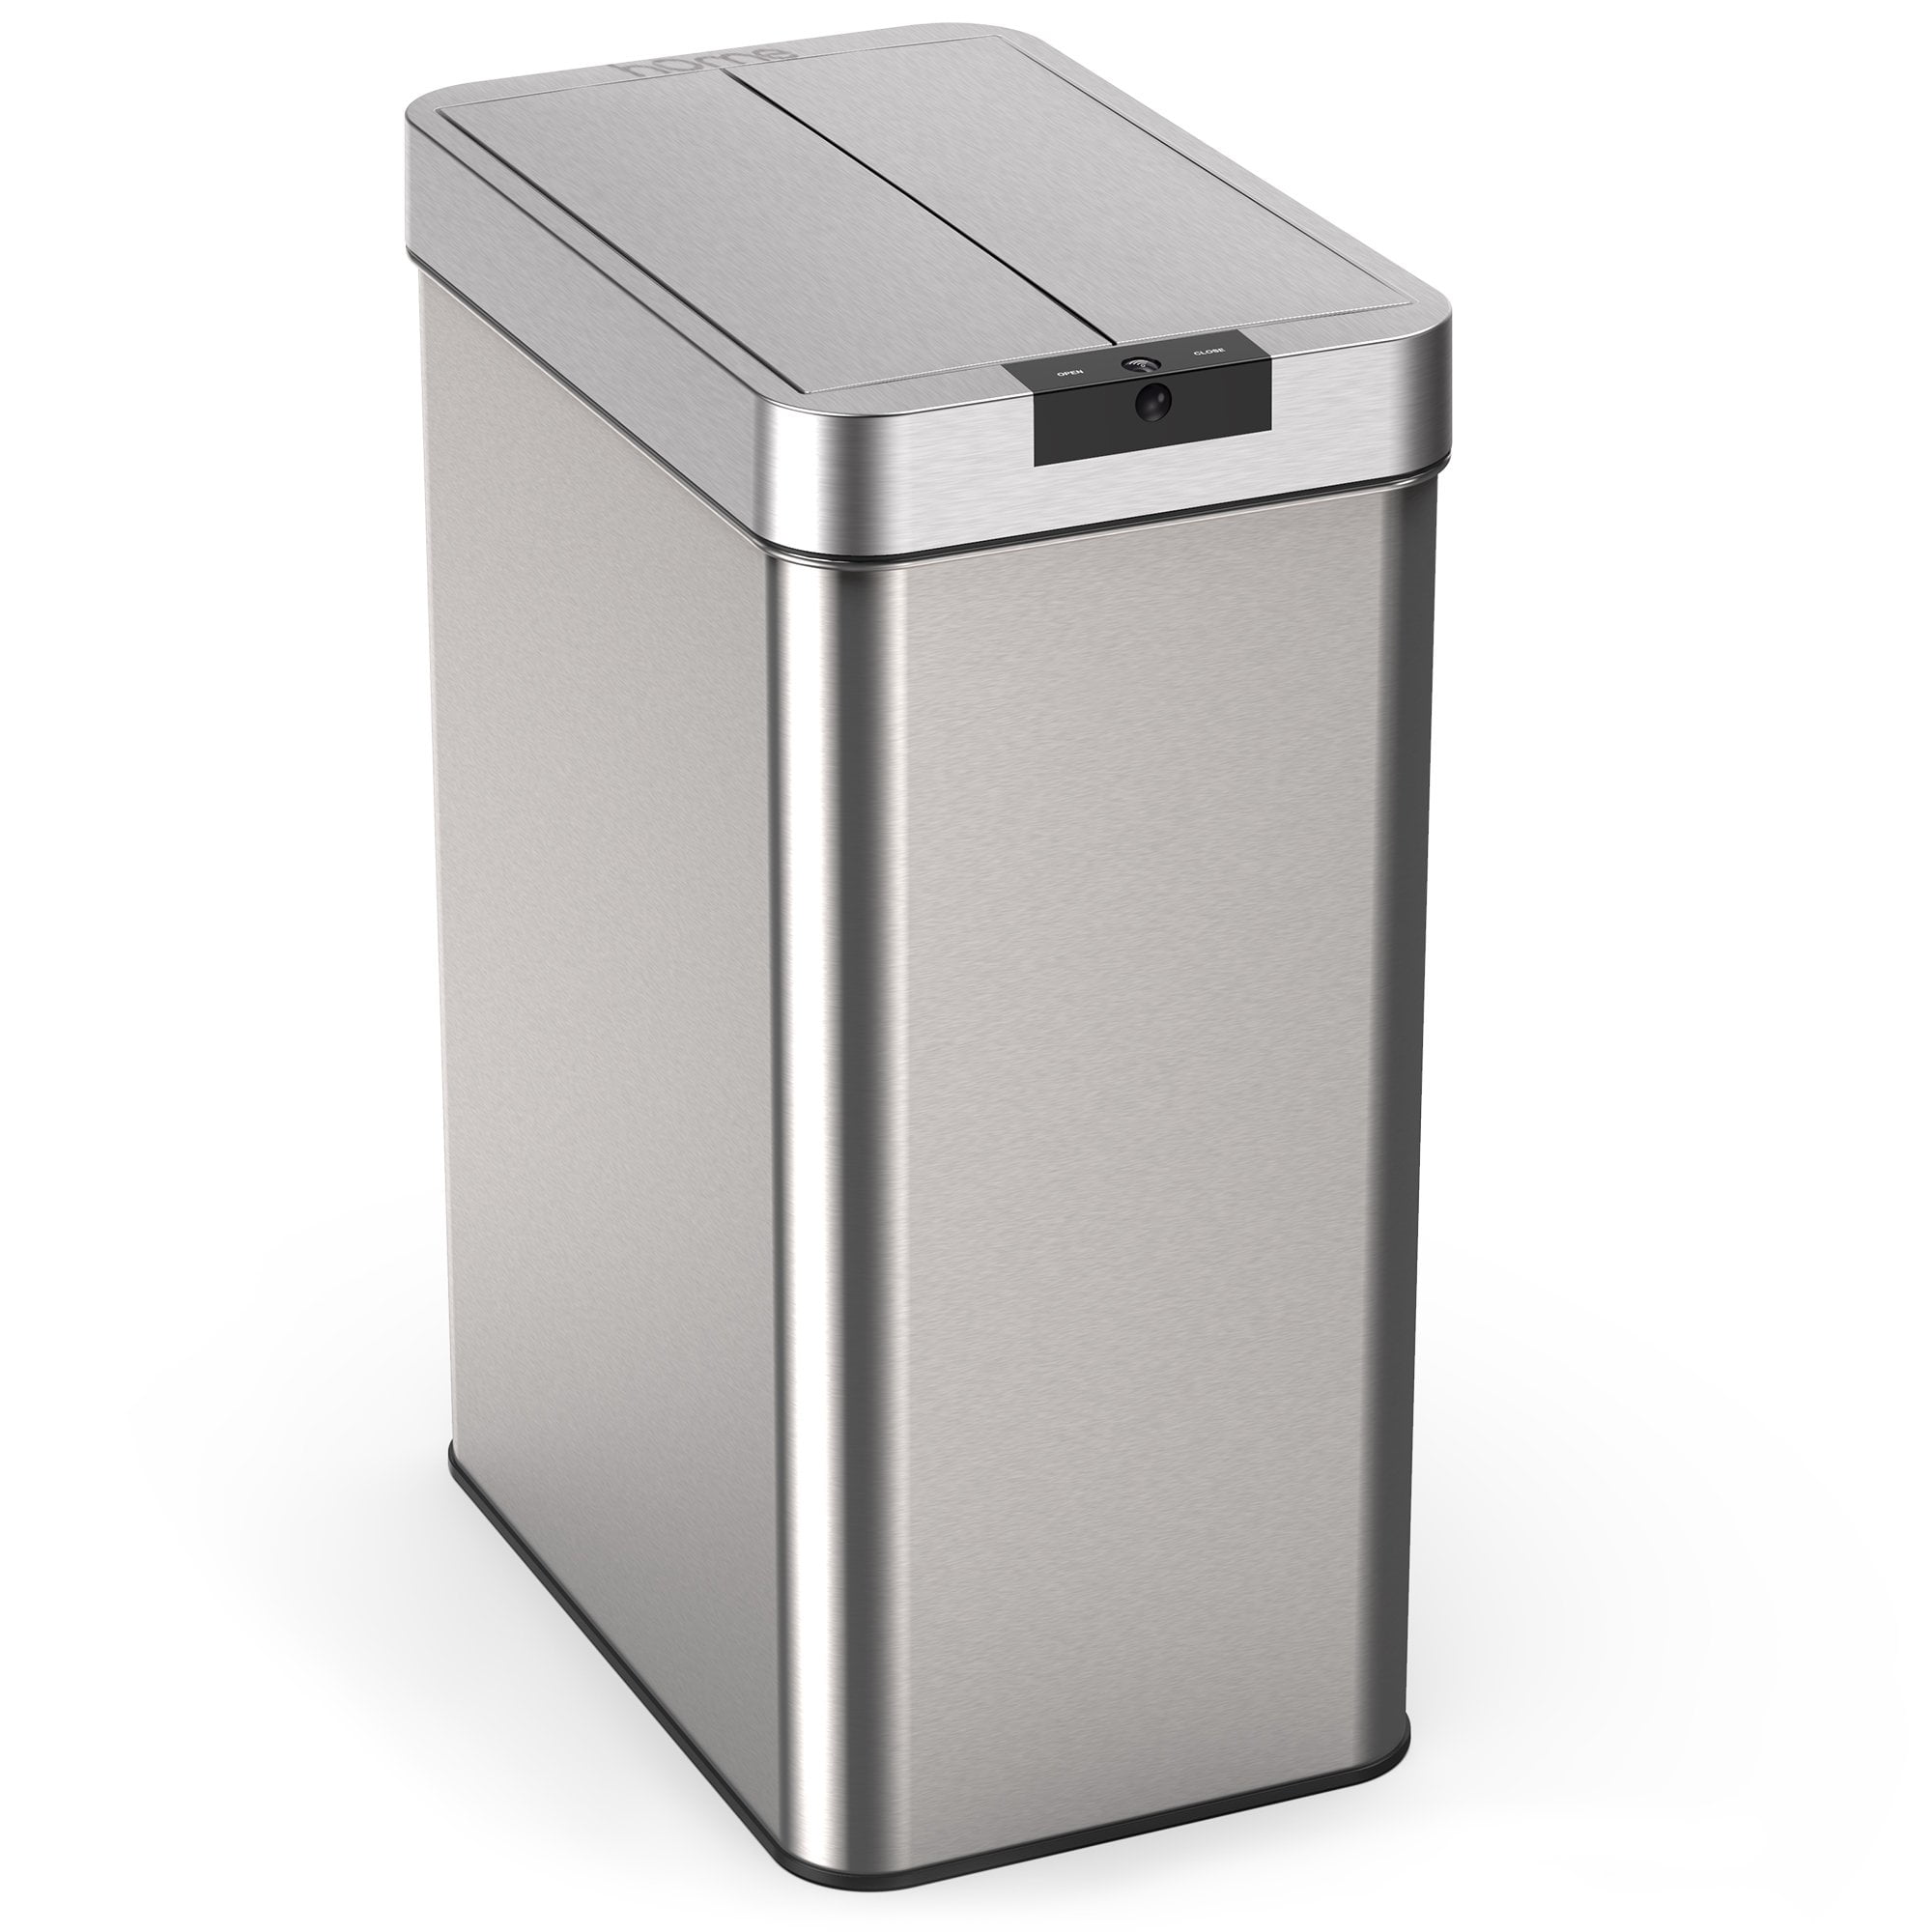 Mainstay MS-50-22 Motion Sensor Trash Can Stainless Steel for sale online 13.2 Gallon 